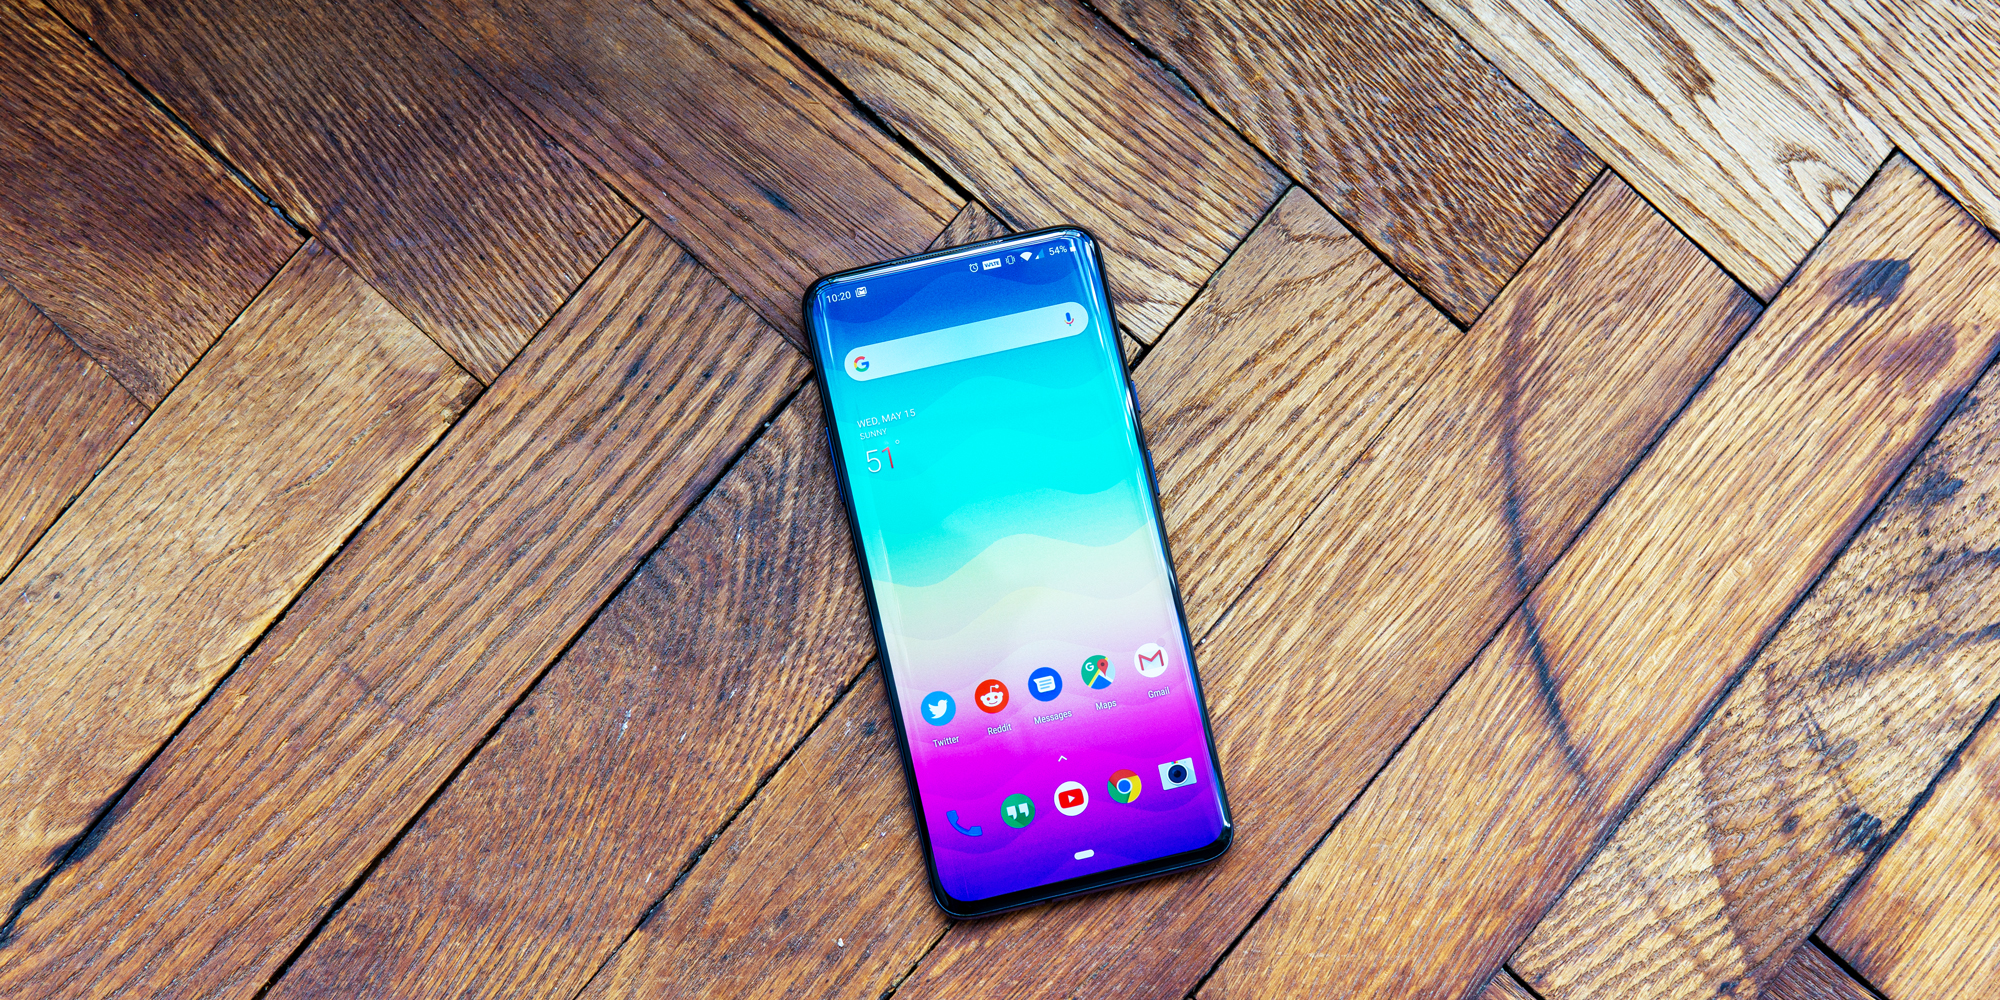 These $500 Android phones you probably haven’t heard of ended up being 2 of my favorite smartphones of 2019. But there’s a clear winner between them.